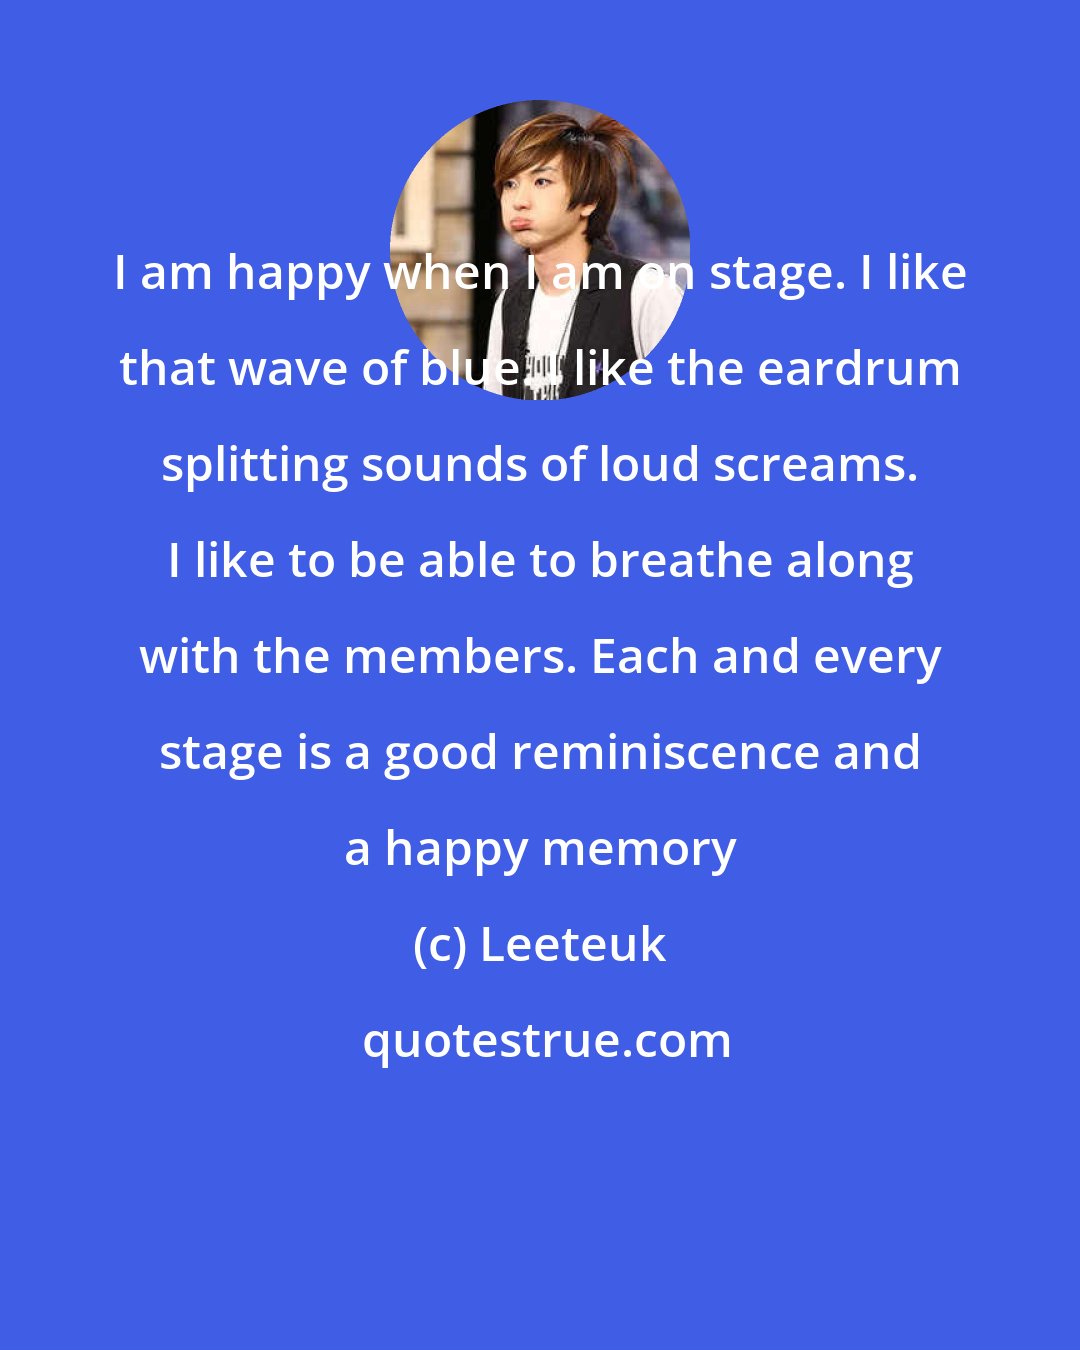 Leeteuk: I am happy when I am on stage. I like that wave of blue. I like the eardrum splitting sounds of loud screams. I like to be able to breathe along with the members. Each and every stage is a good reminiscence and a happy memory